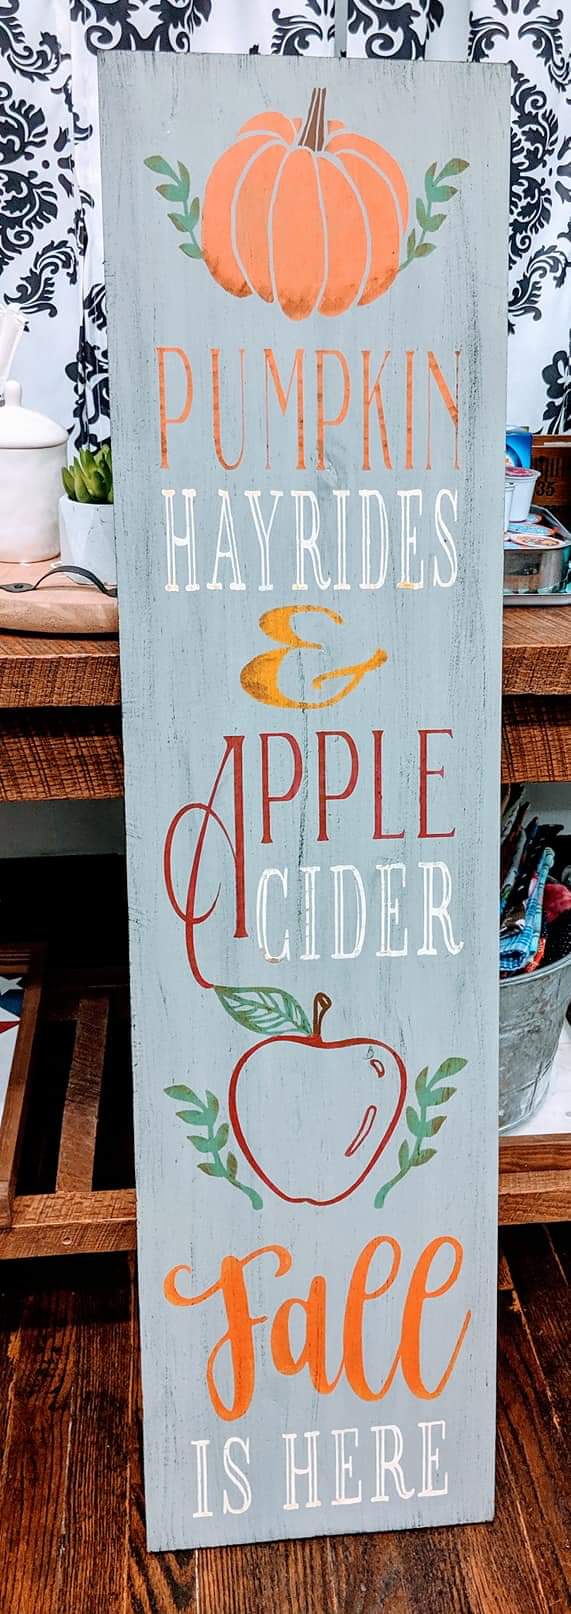 Pumpkin hayrides and apple cider Fall is here